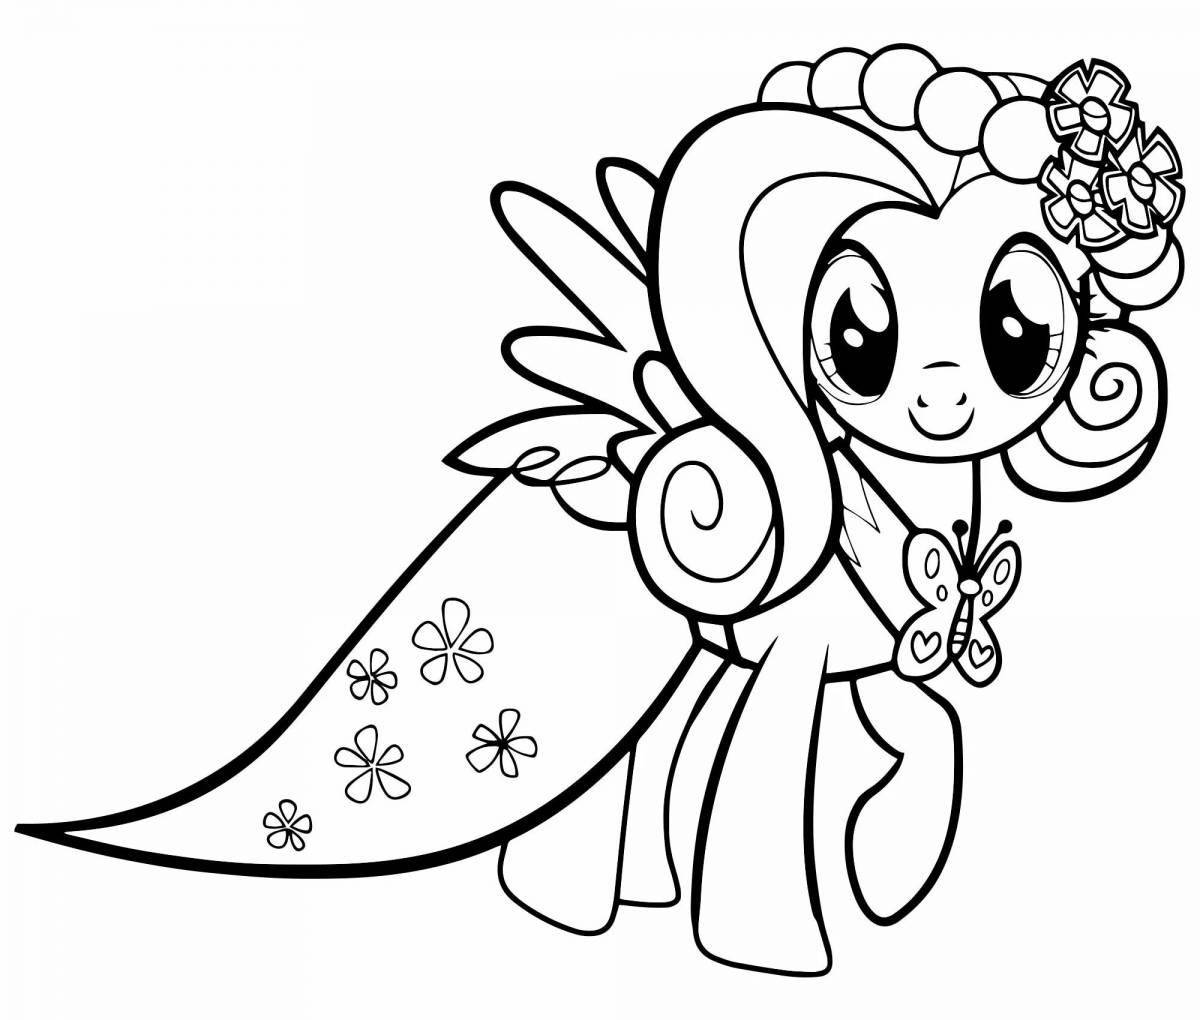 Glamorous pony coloring book for kids